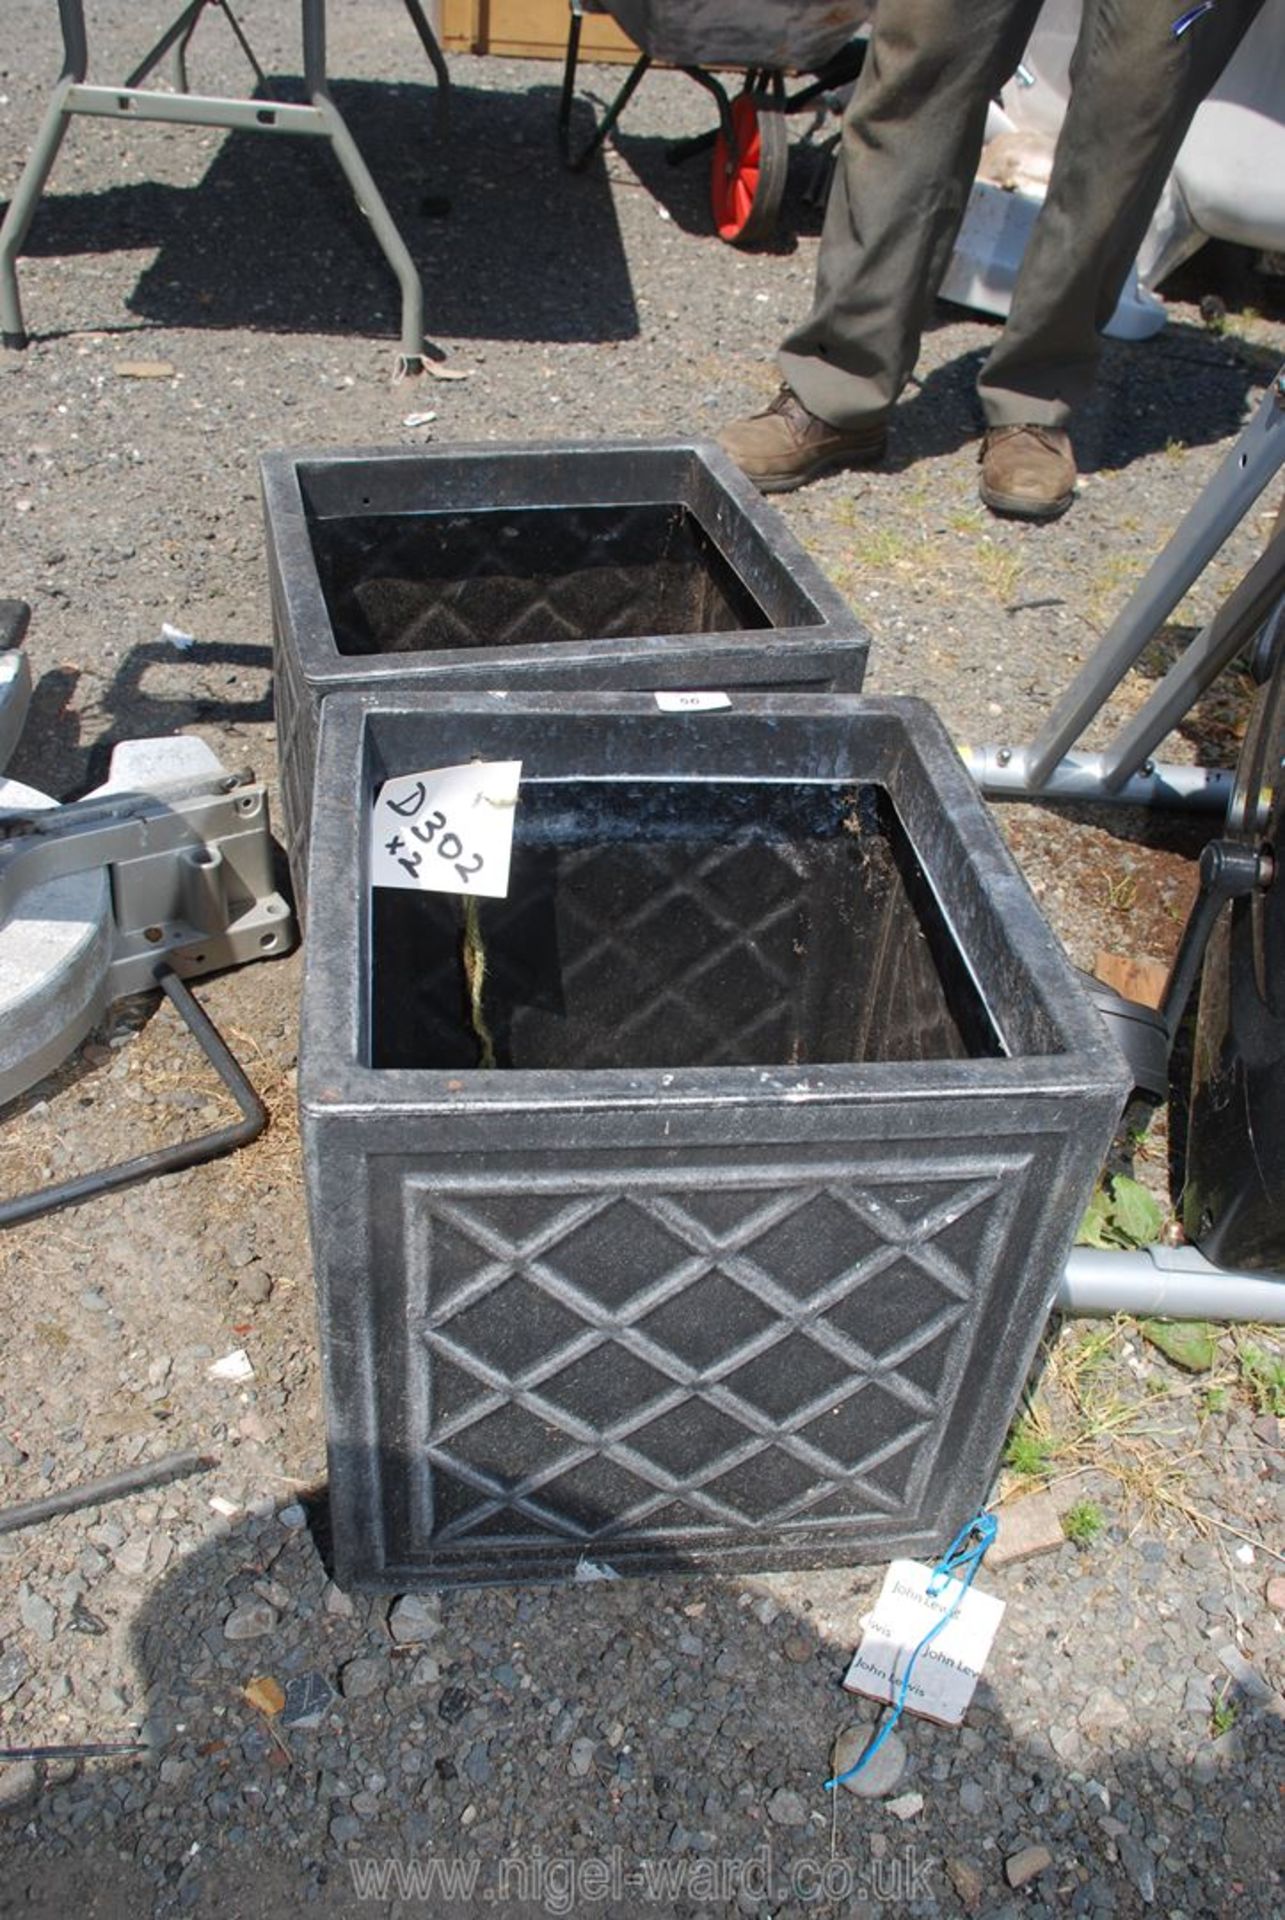 A pair of moulded plastic planters,